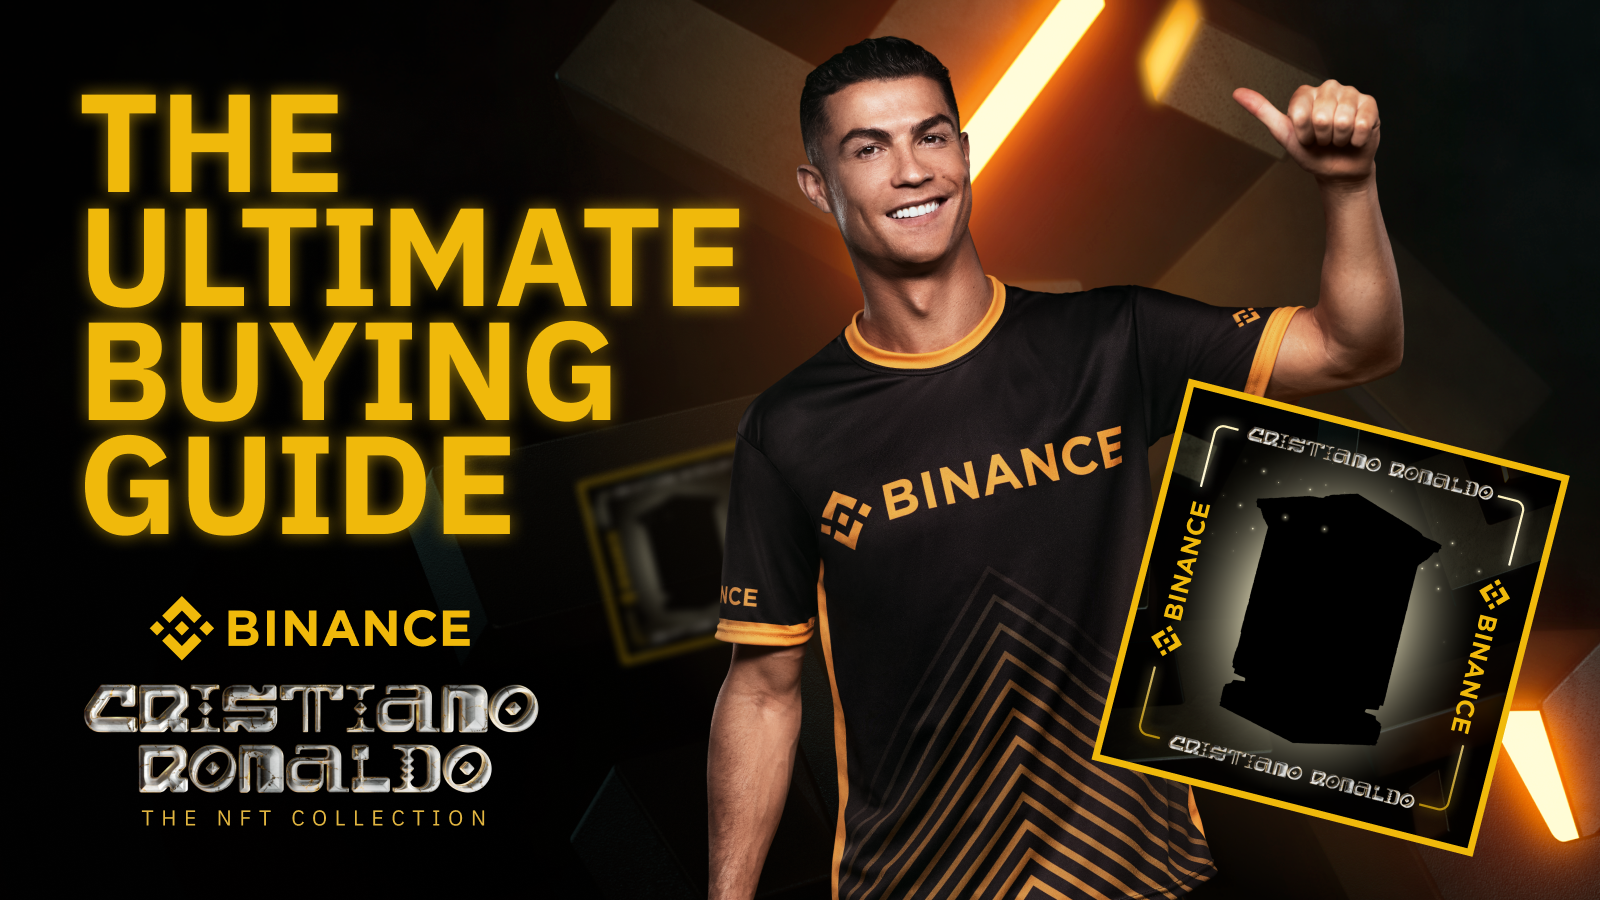 Cristiano Ronaldo Partnered With Binance To Unveil CR7 NFT Collection